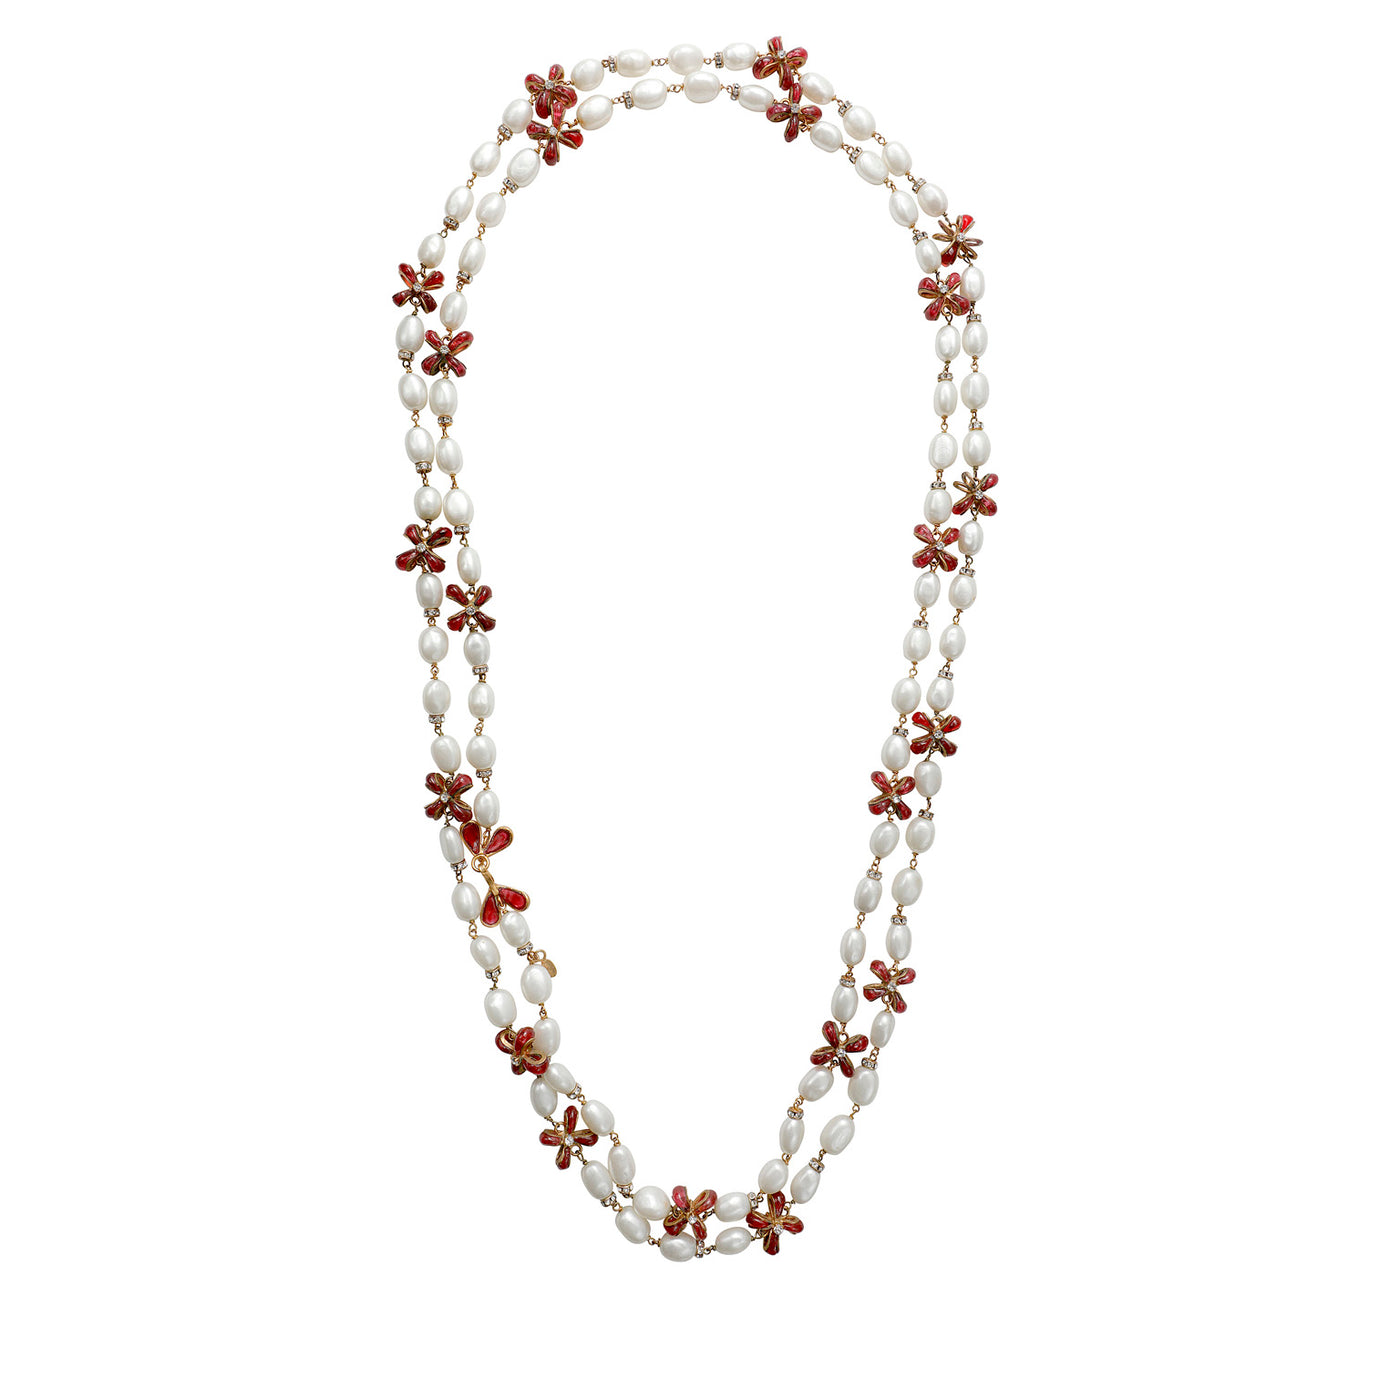 Chanel Pearl & Red Borquoix Flowers Necklace